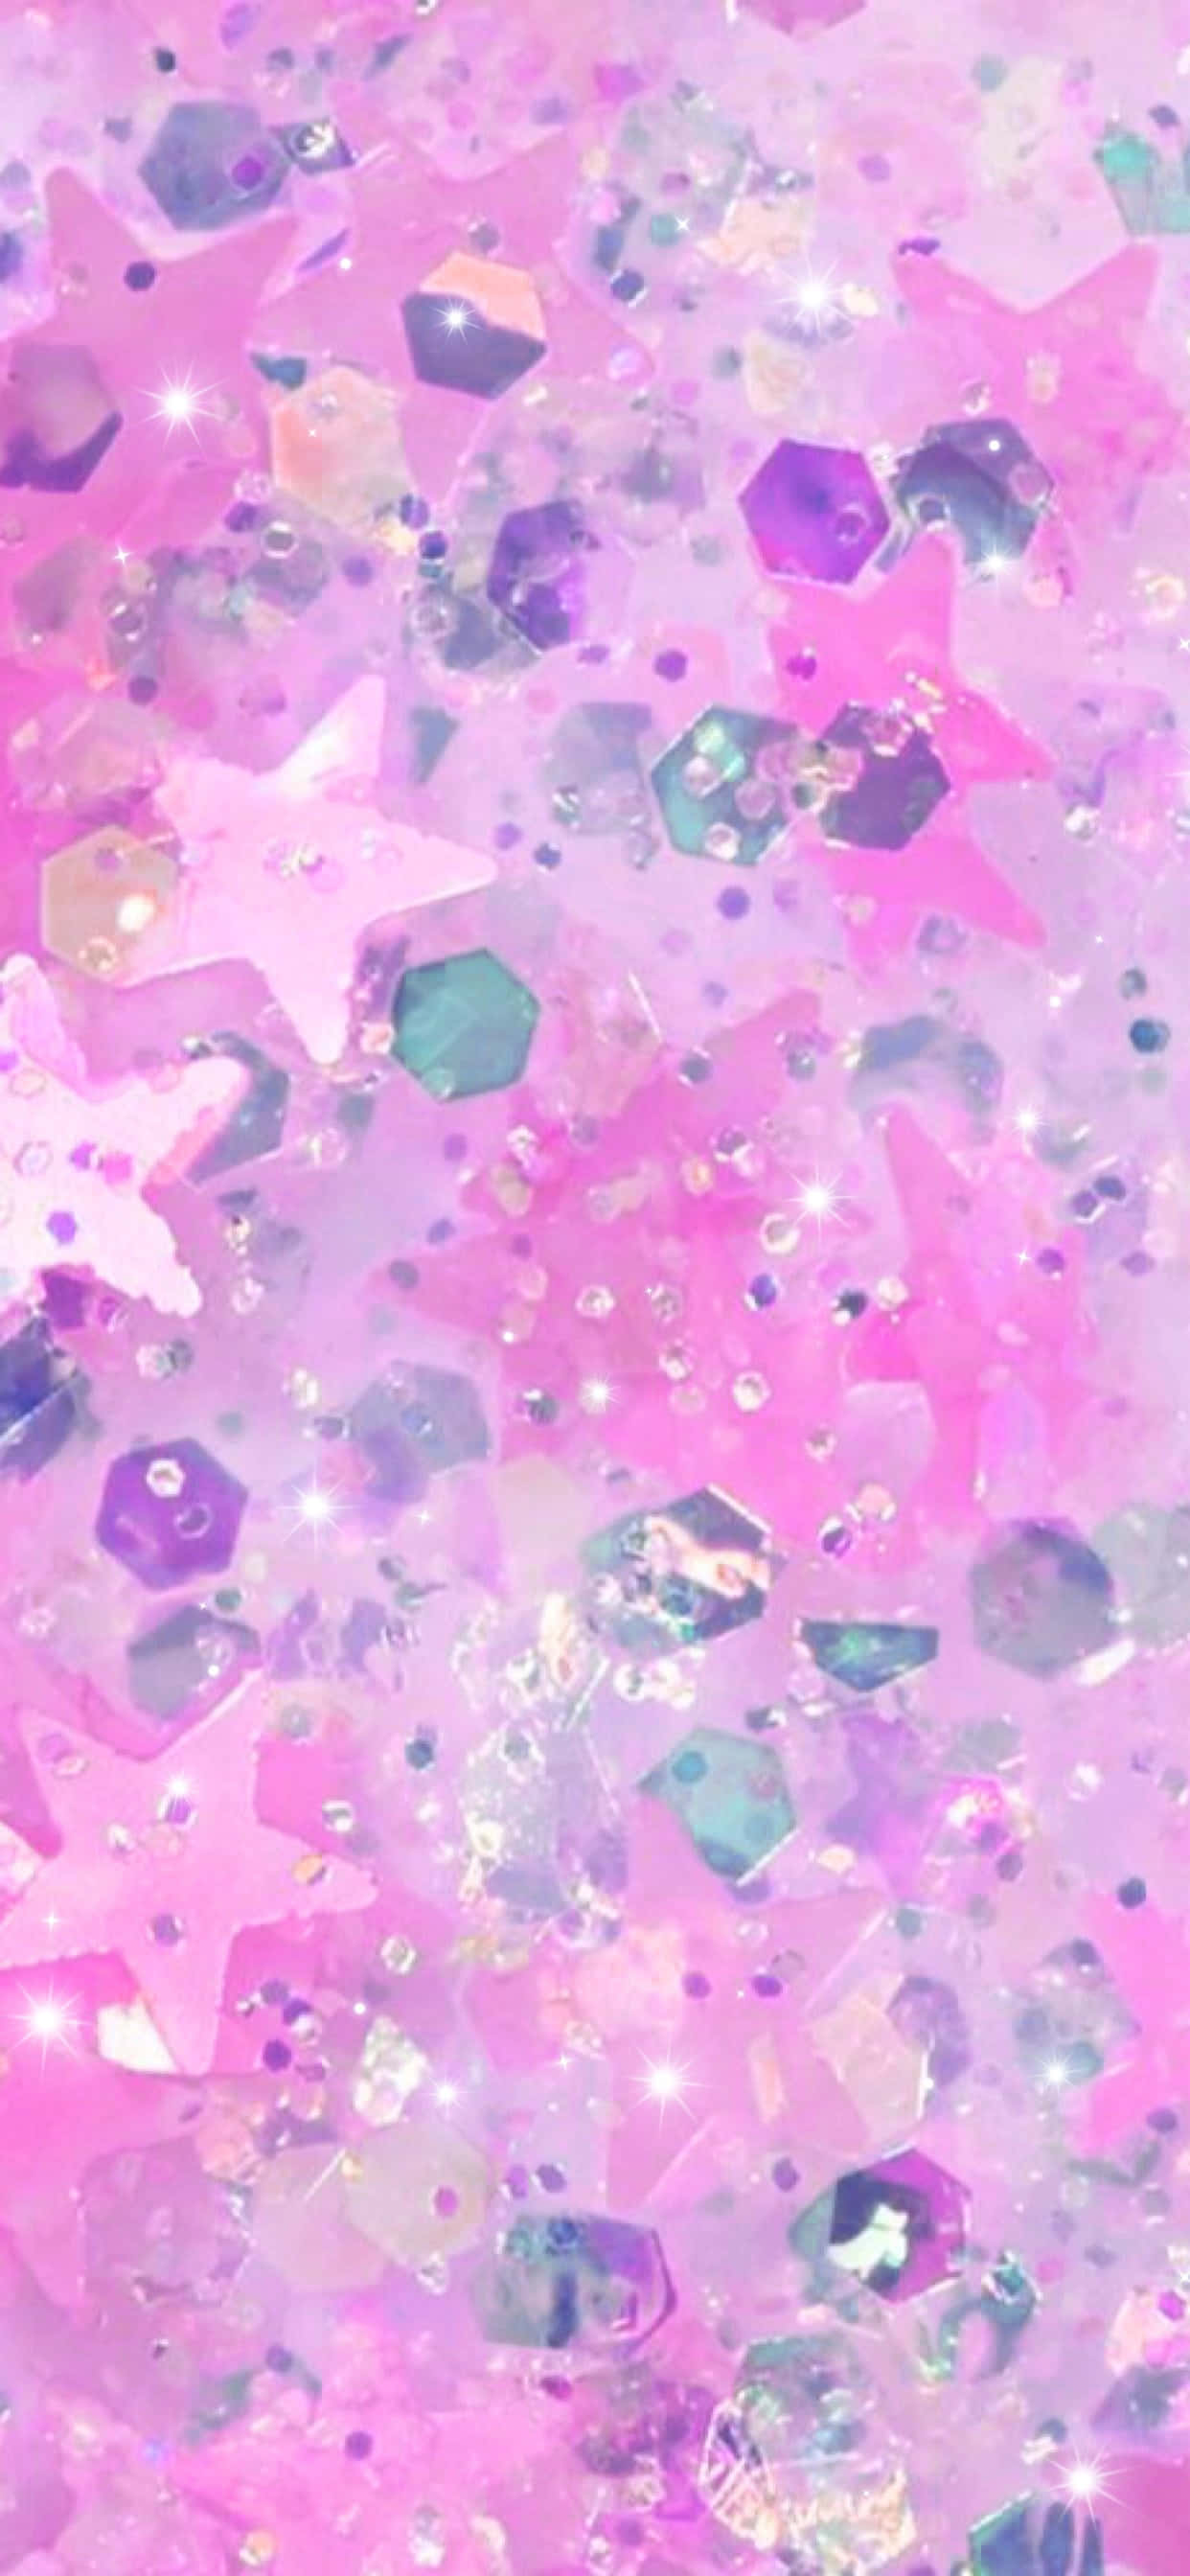 Download Glitter Pink Background 1242 X 2688 | Wallpapers.com